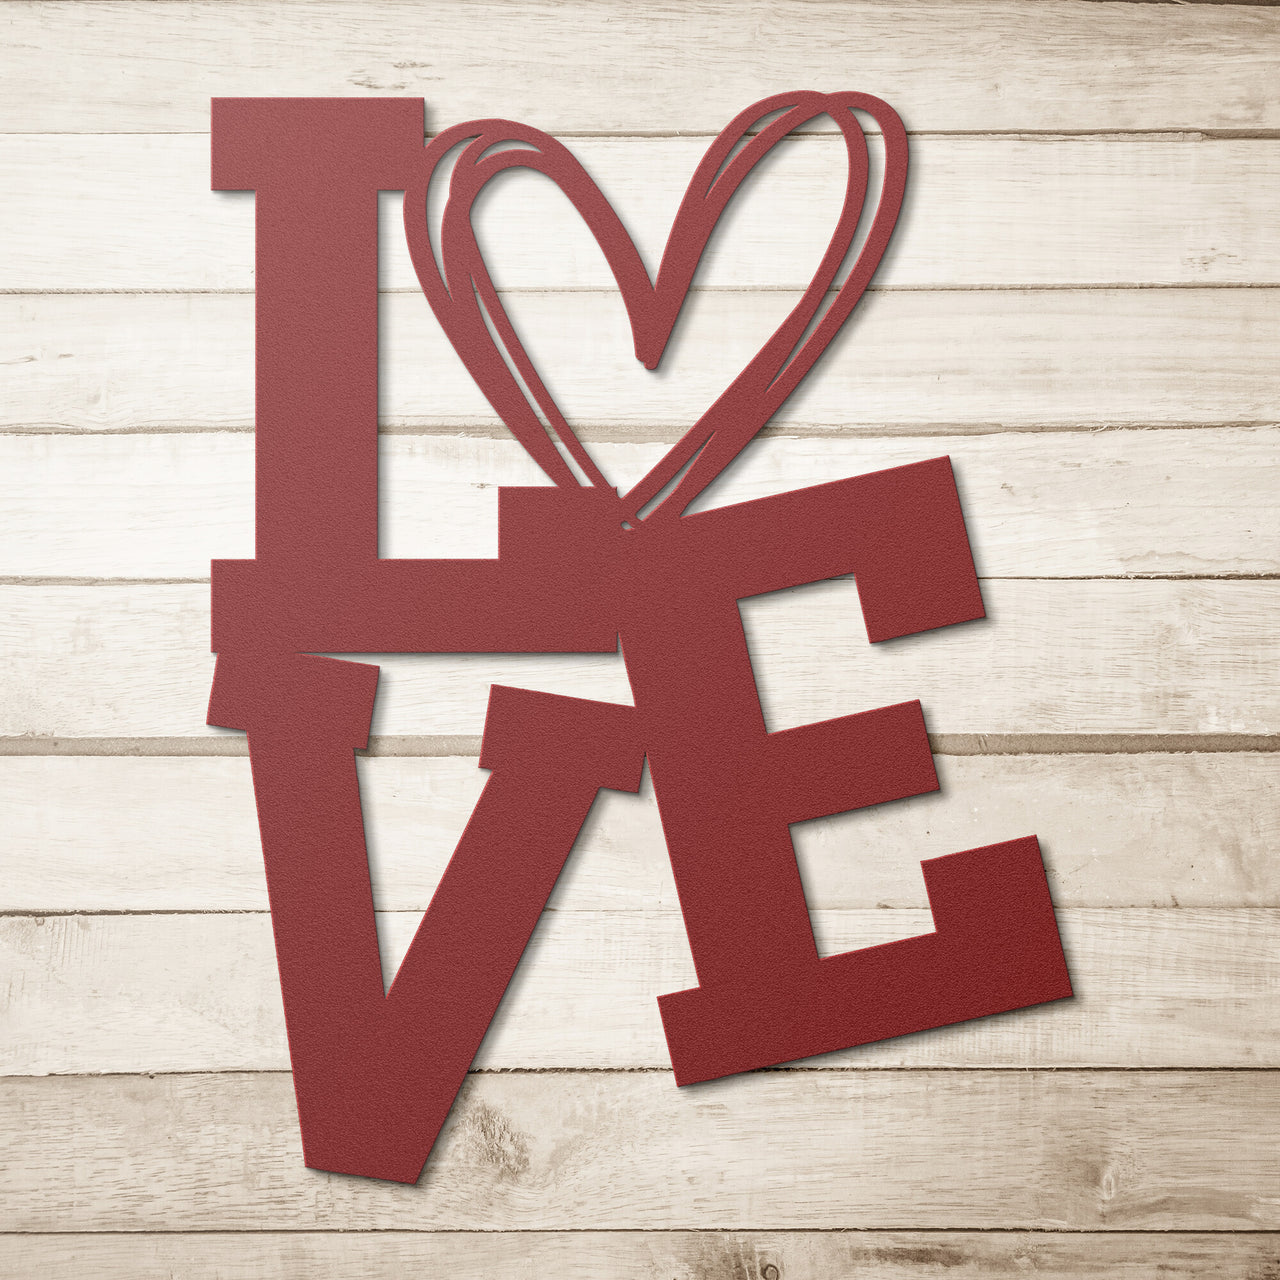 About Love Graphic-1_Steel Wall Art